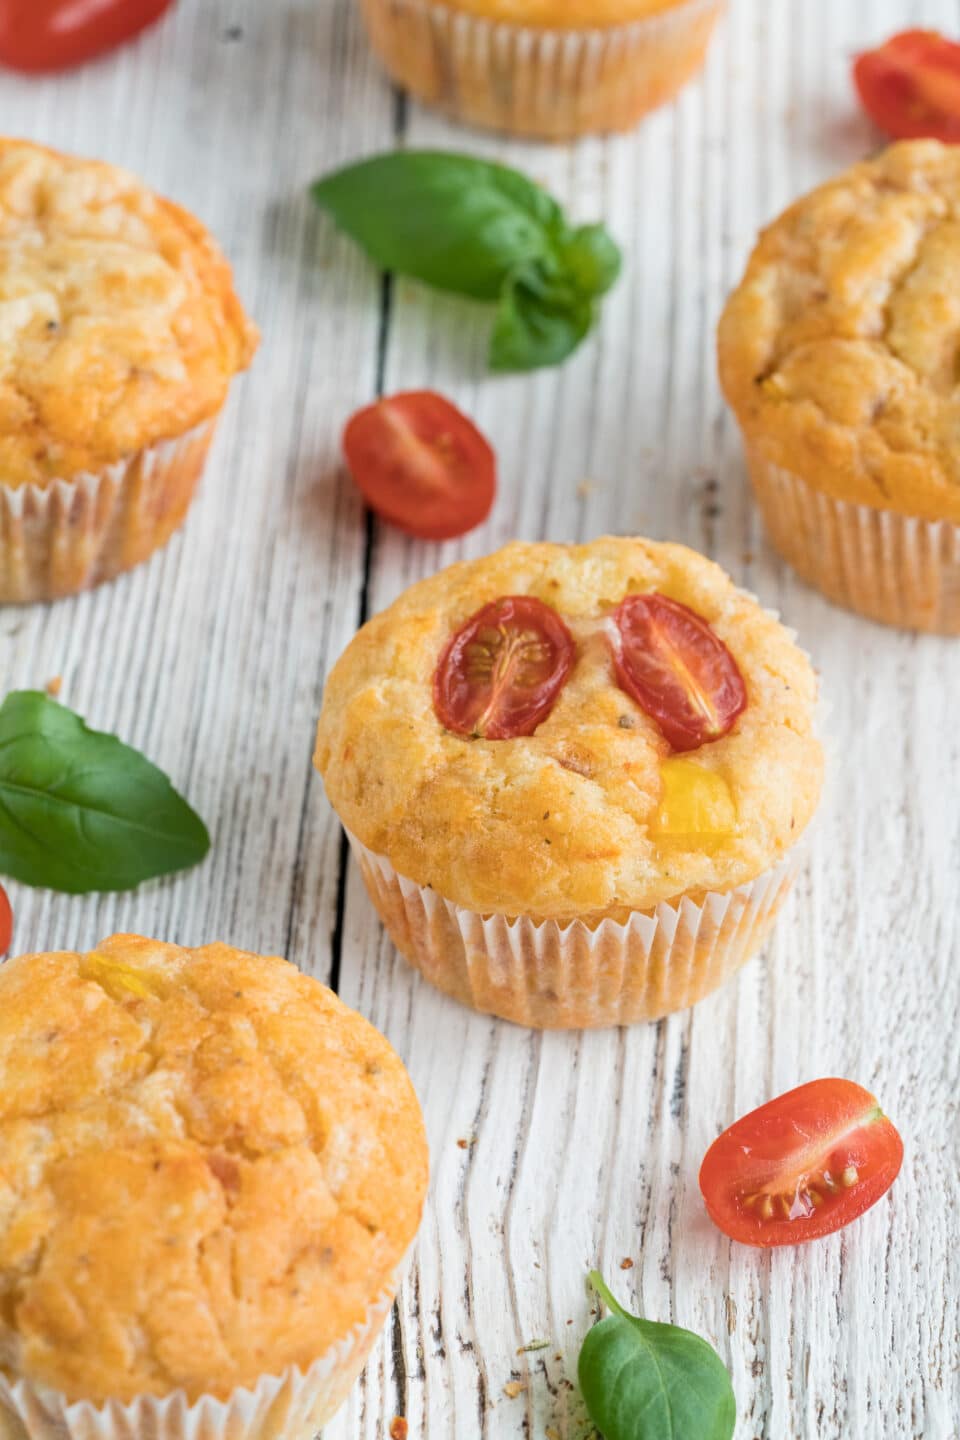 Hearty Muffins with Veggies and Cheese